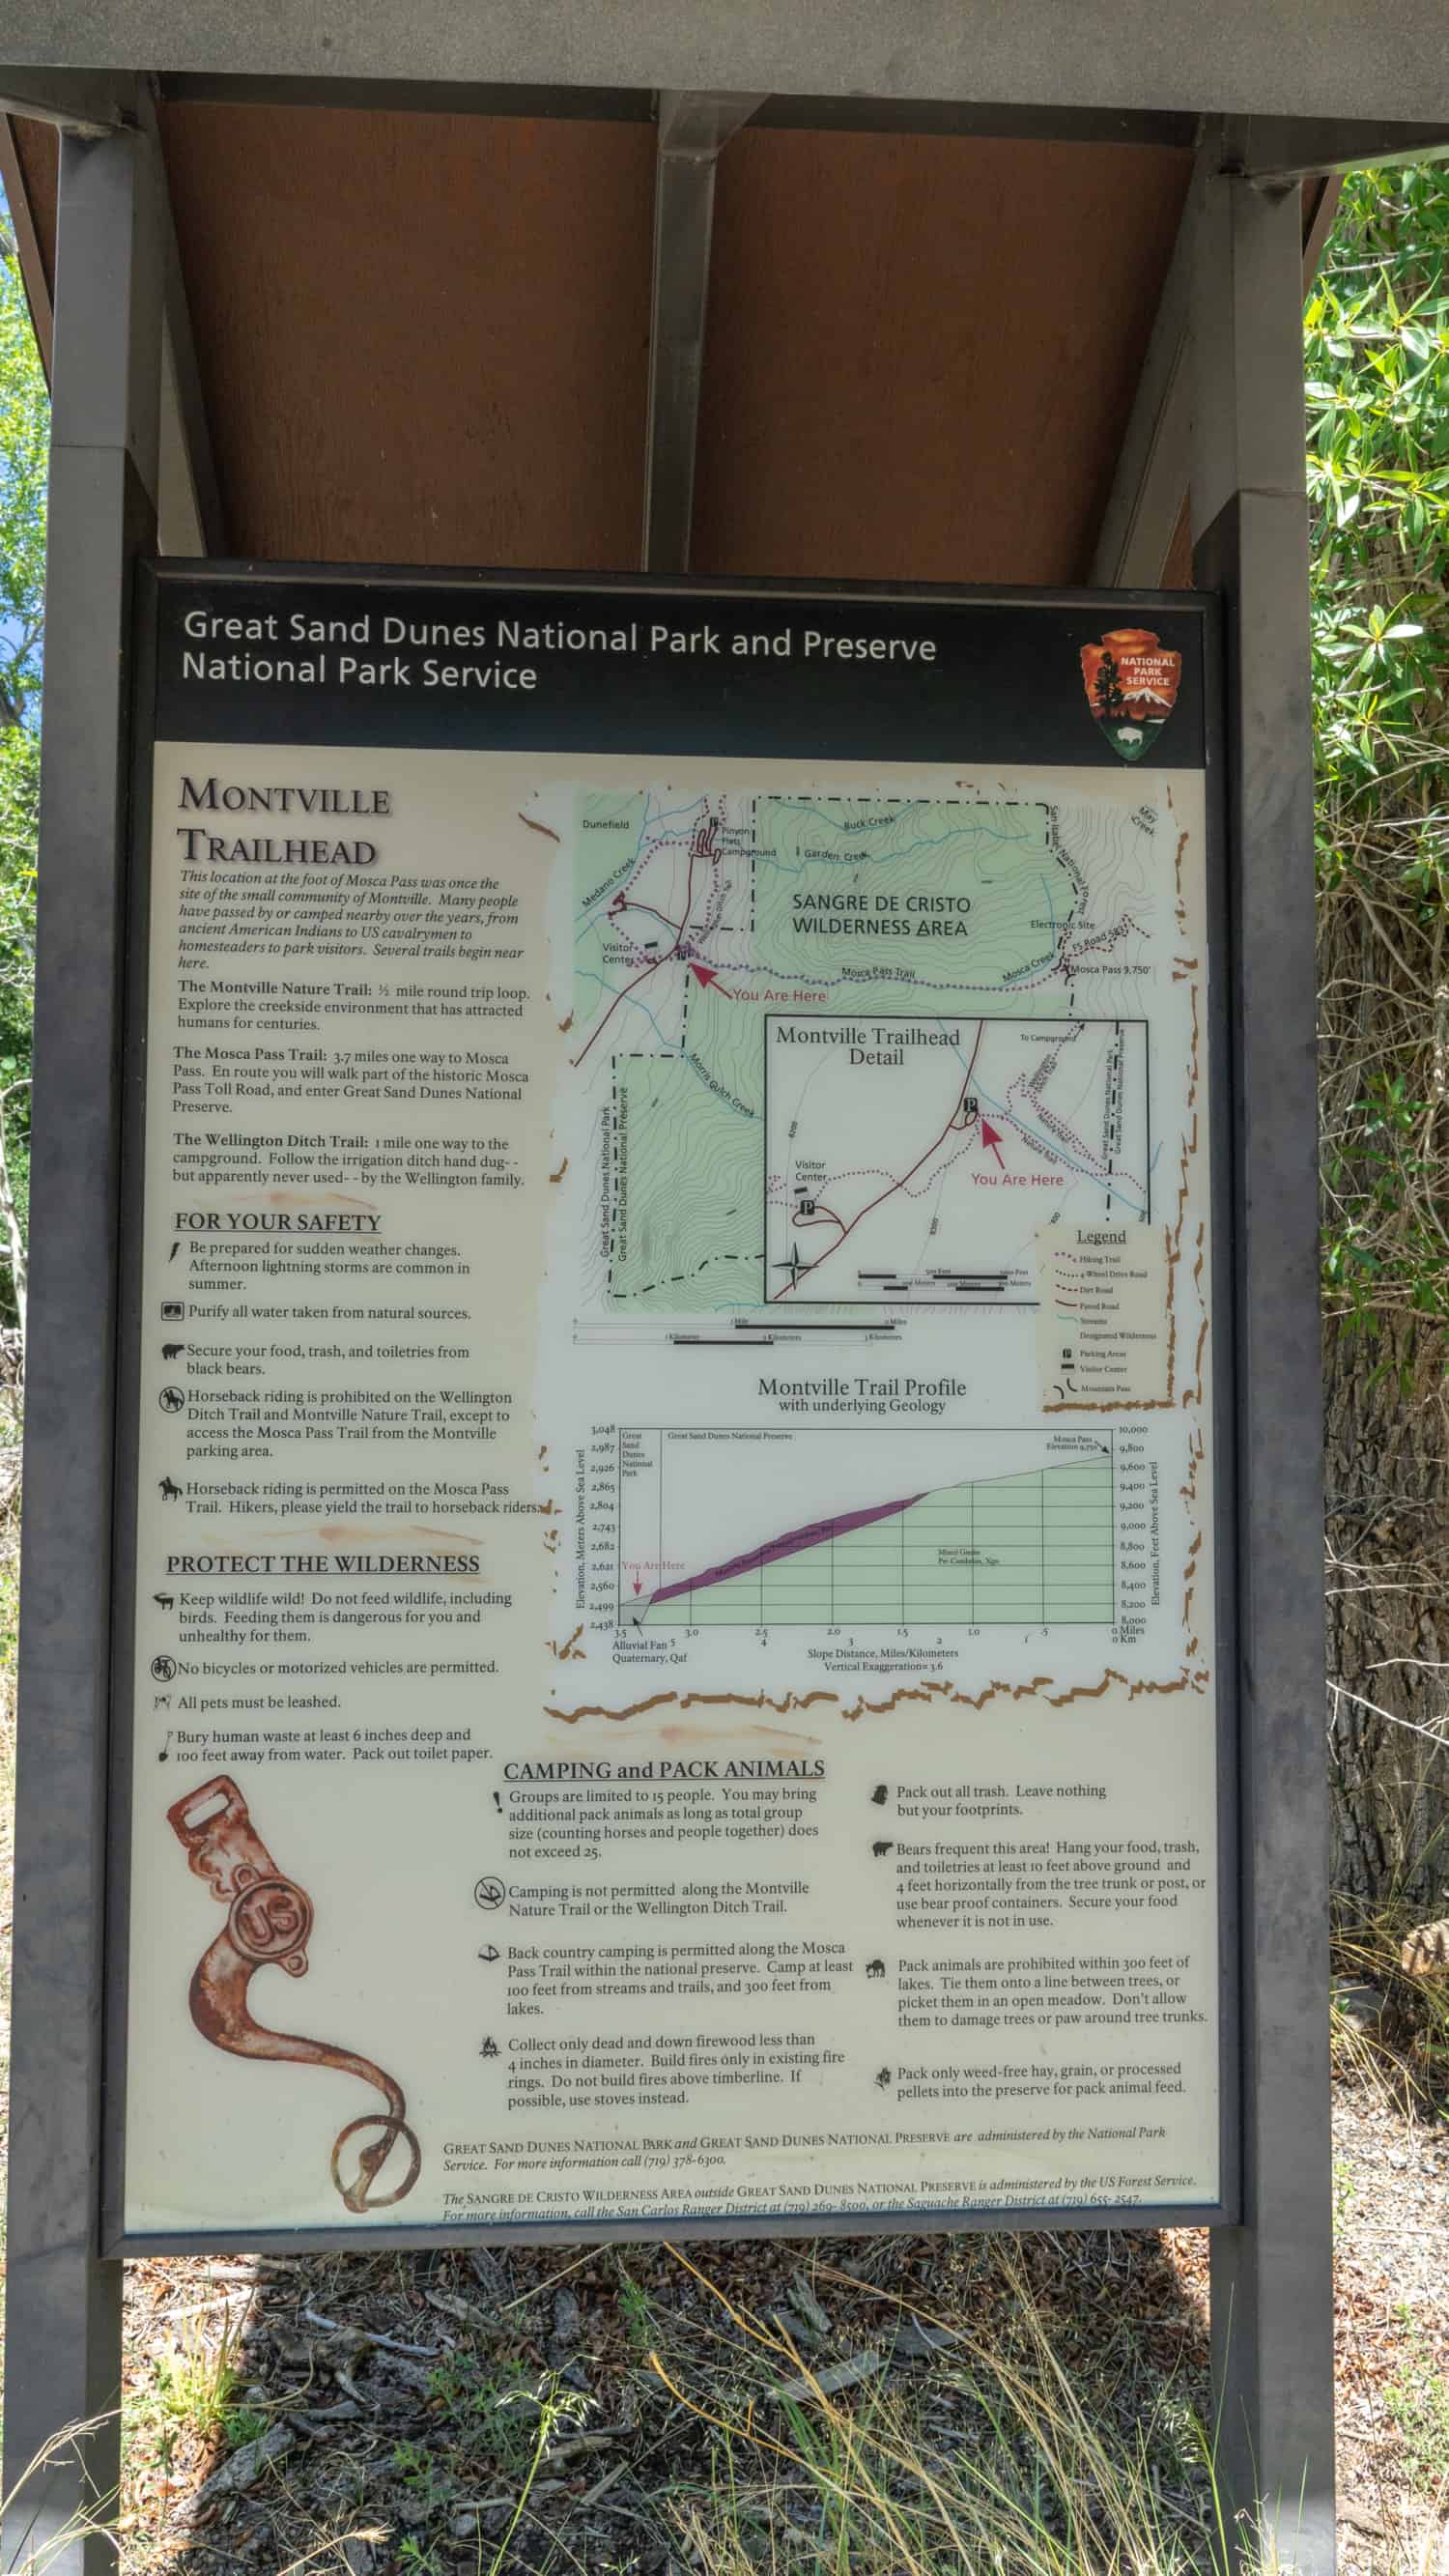 Sign indicating trails suitable for pets in the Great Sand Dunes National Park